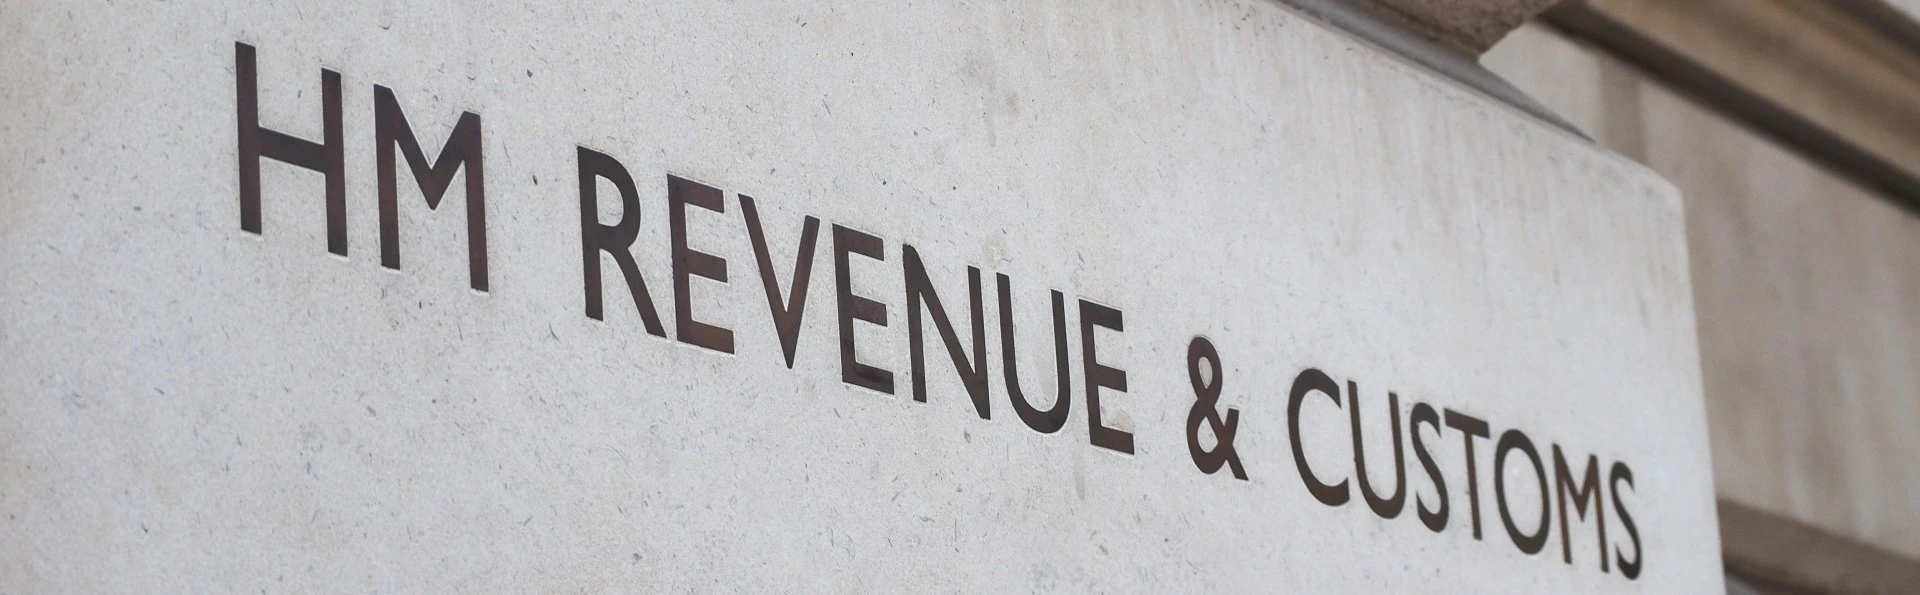 HM Revenue & Customs engraved into a wall